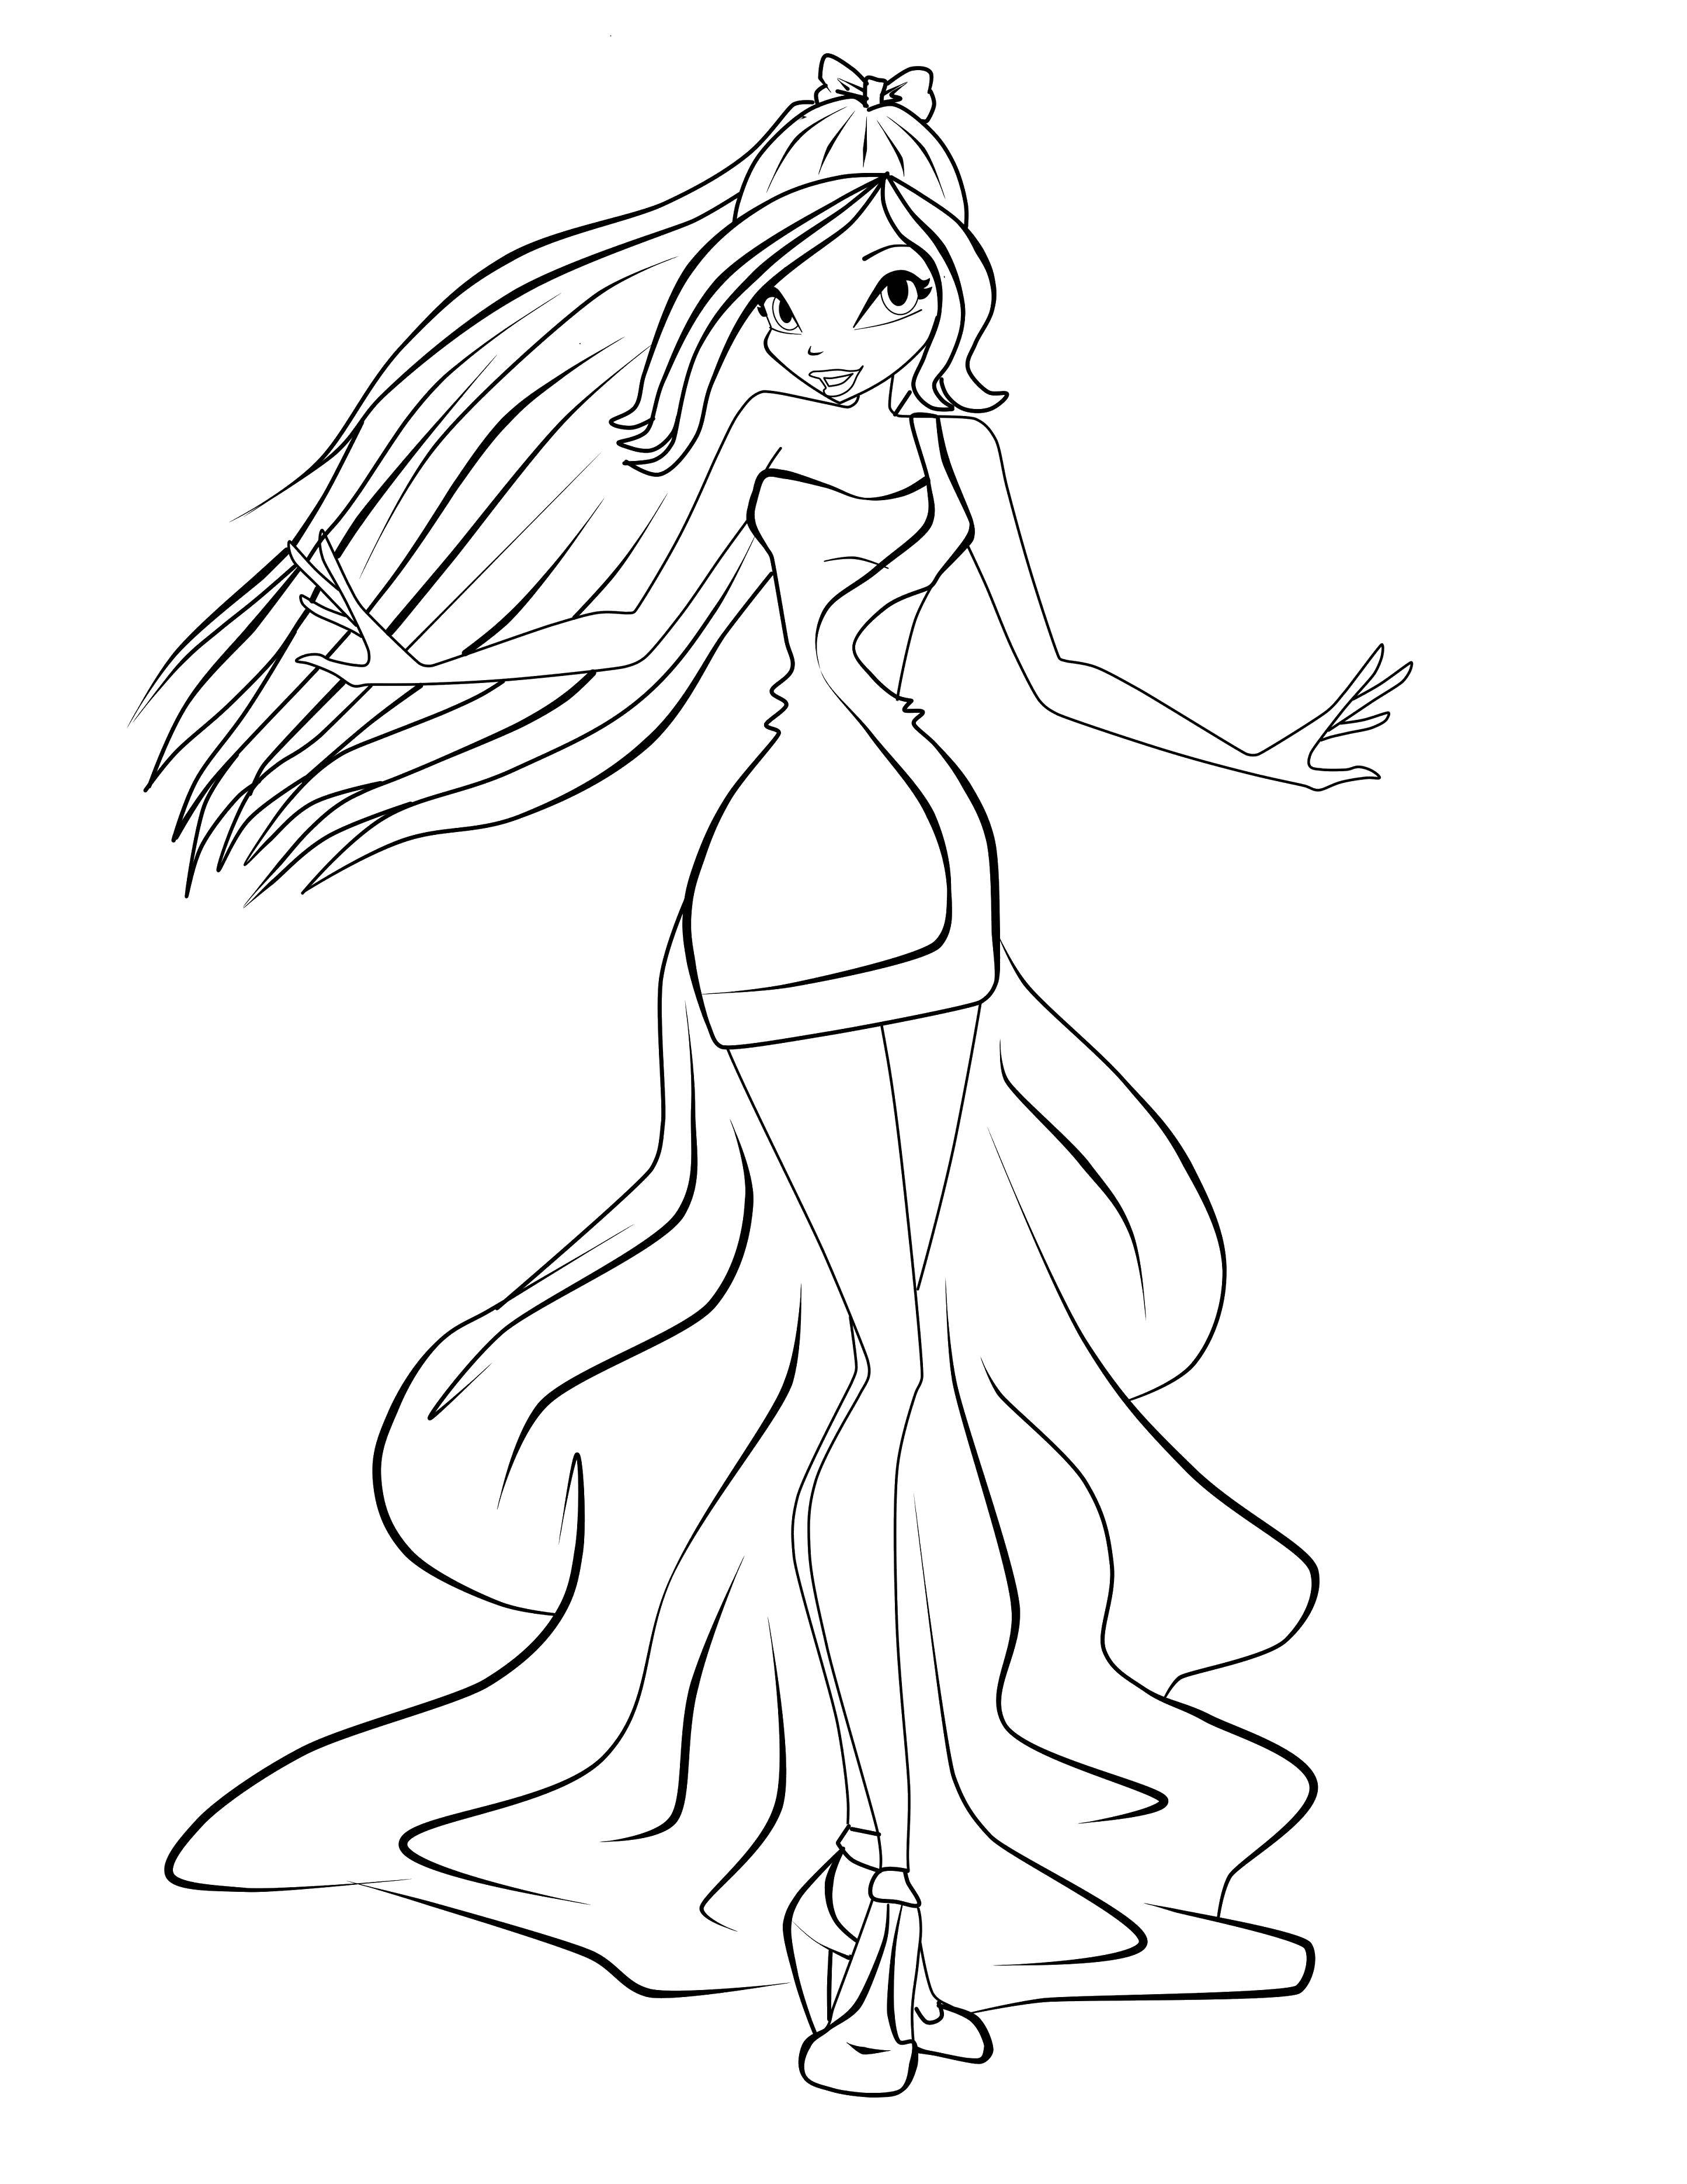 Coloring Flora from winx cartoon. Category Cartoon character. Tags:  Character cartoon, Winx.